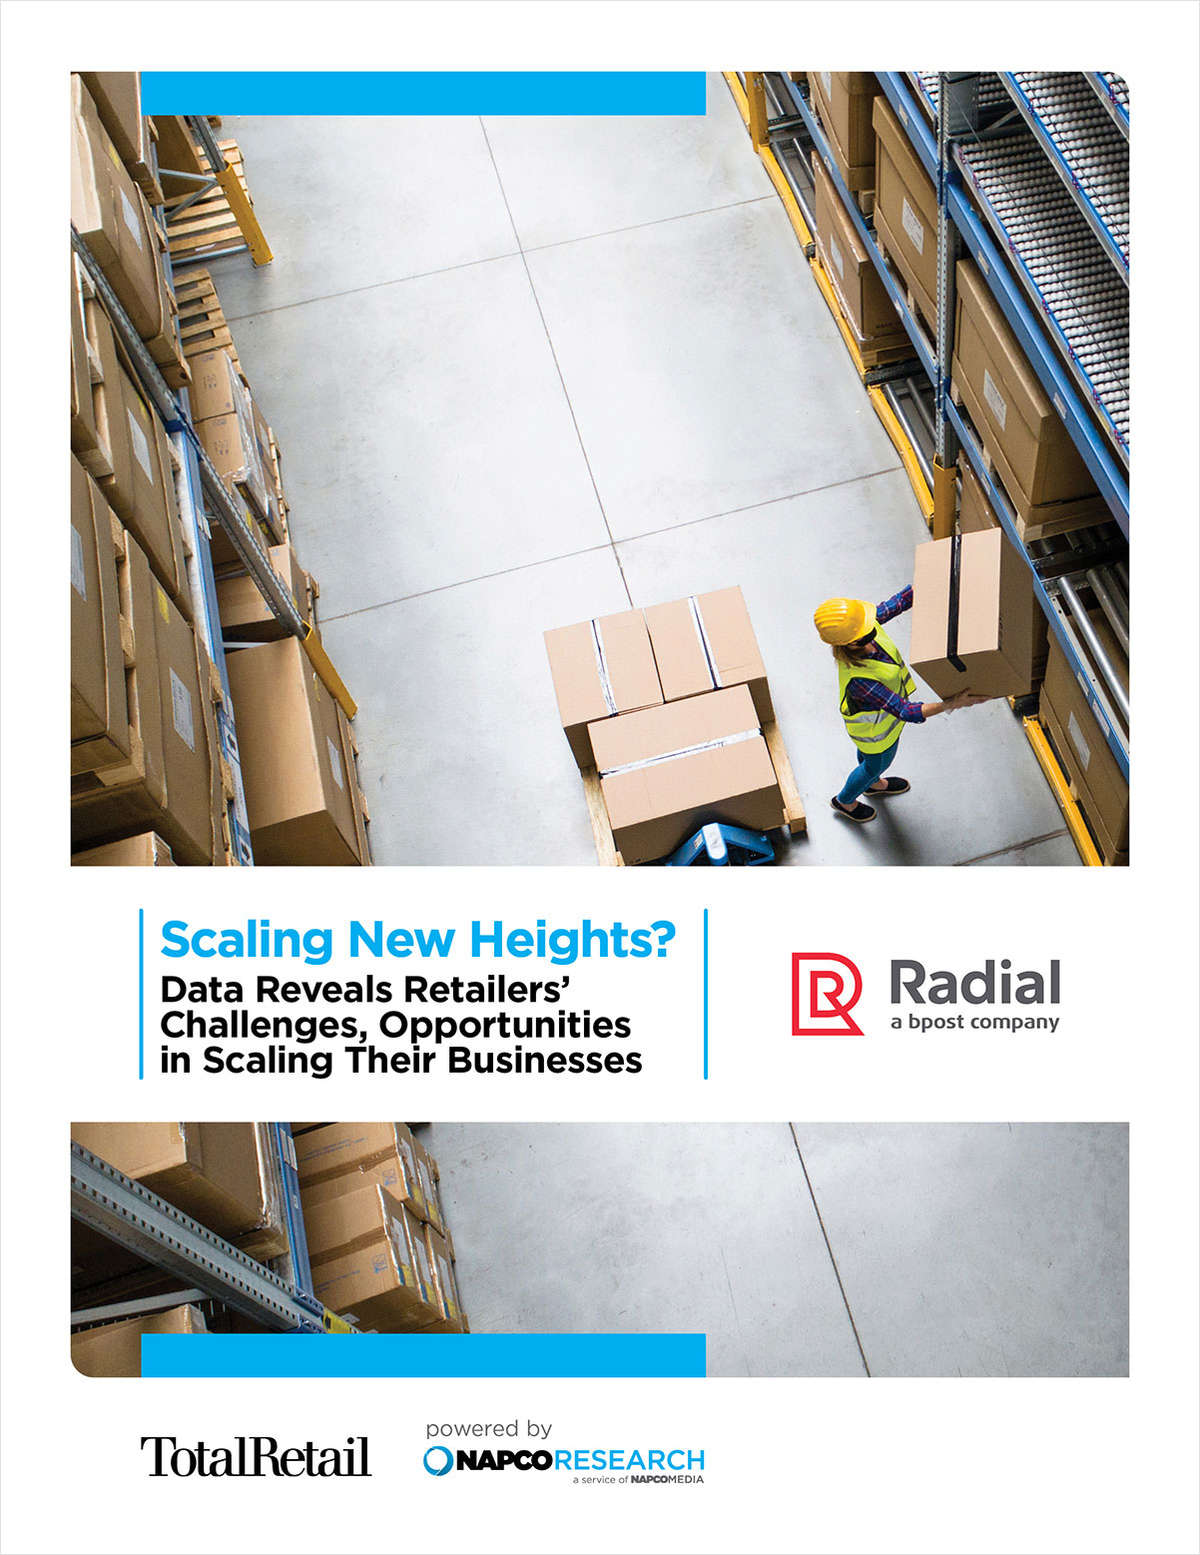 Scaling New Heights? Data Reveals Retailers' Challenges, Opportunities in Scaling Their Businesses